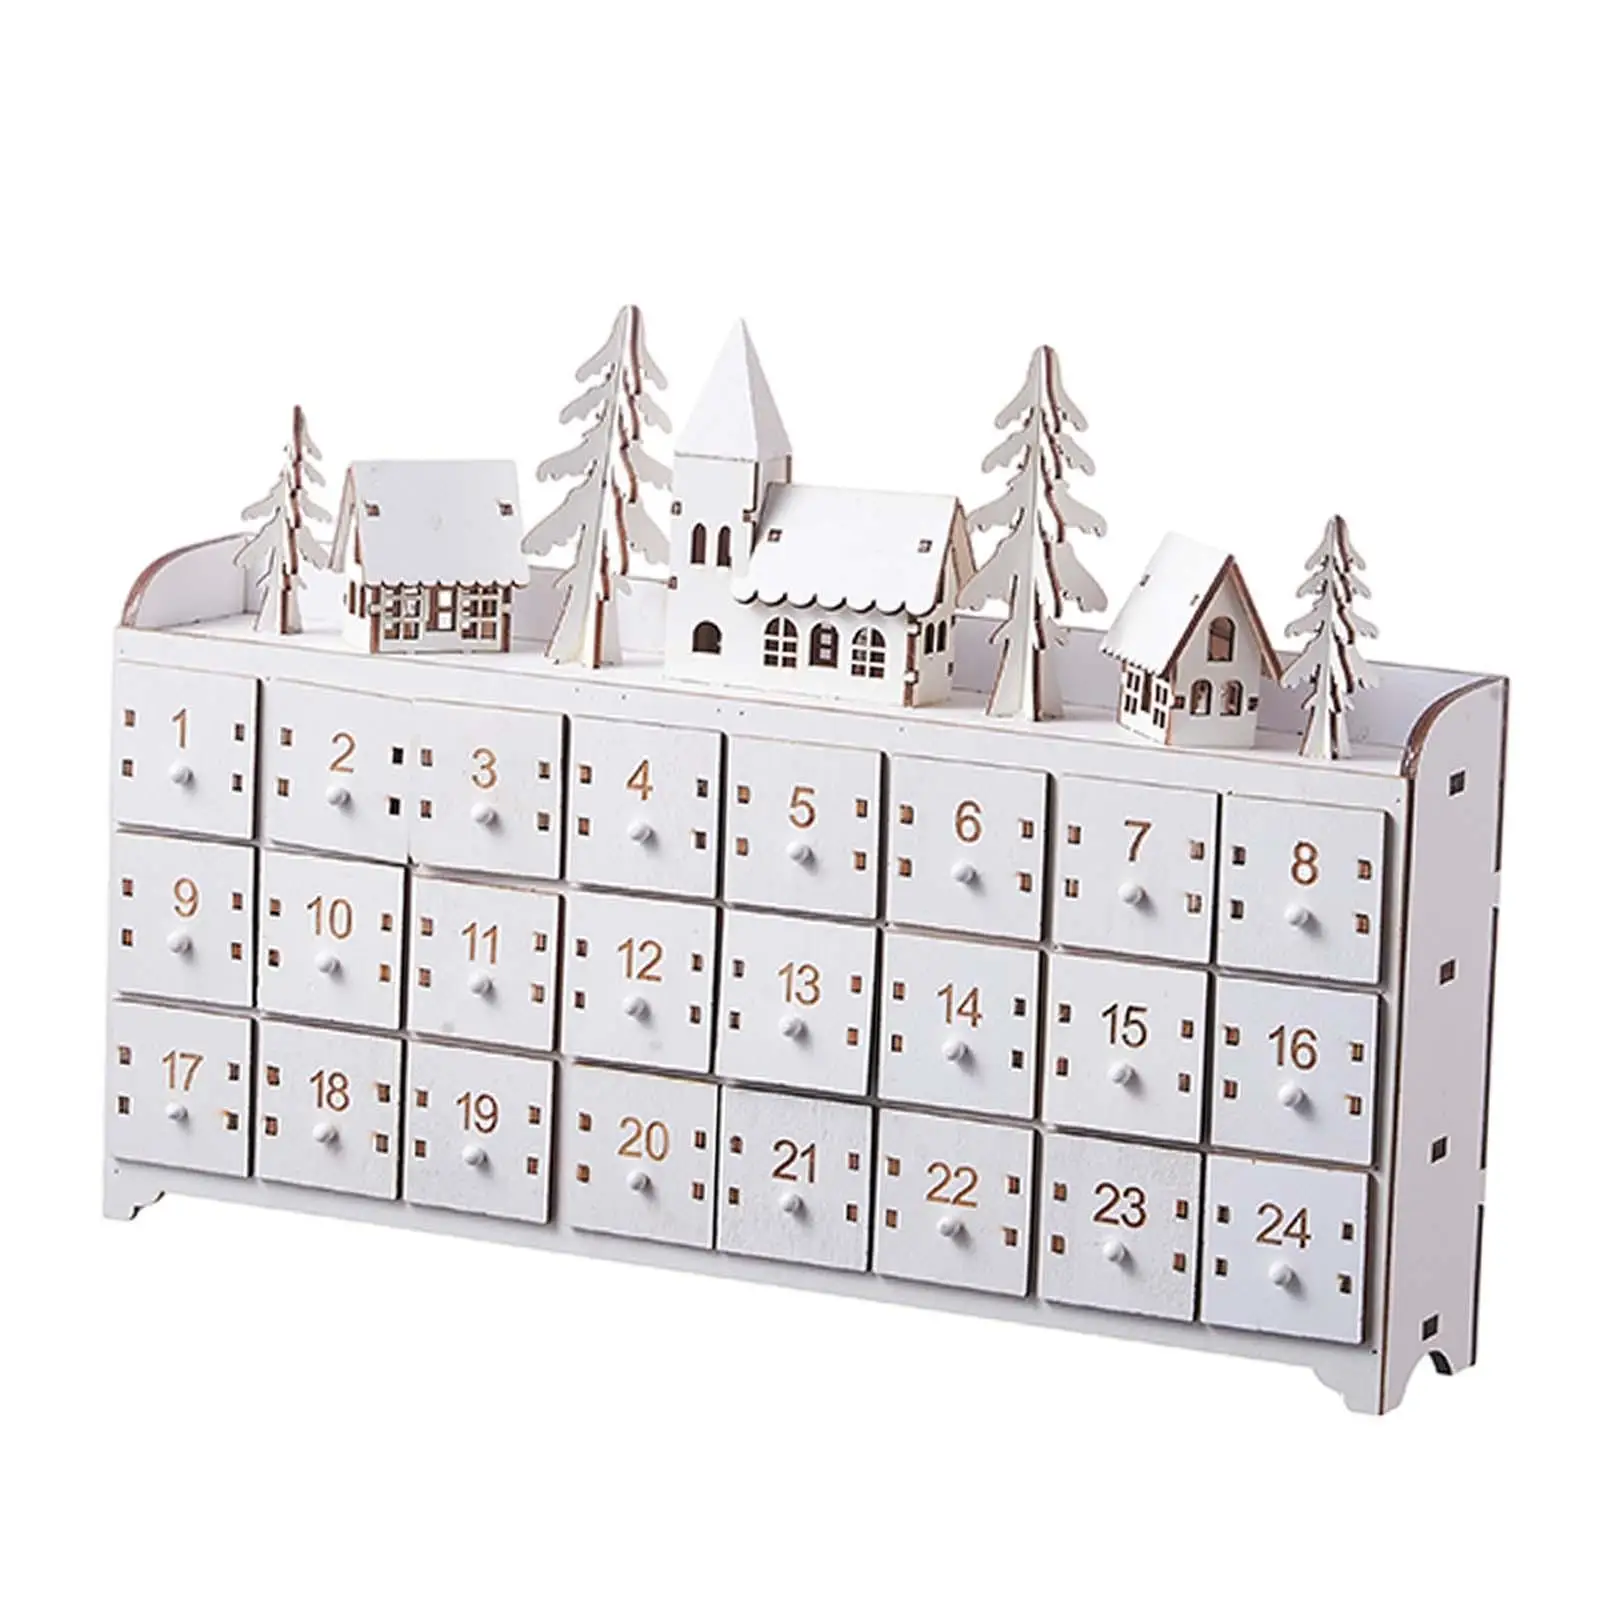 Christmas Wooden Count Xmas Advent Calendar White Color Desk Ornament for Interactive Family Plays Reusable Multipurpose